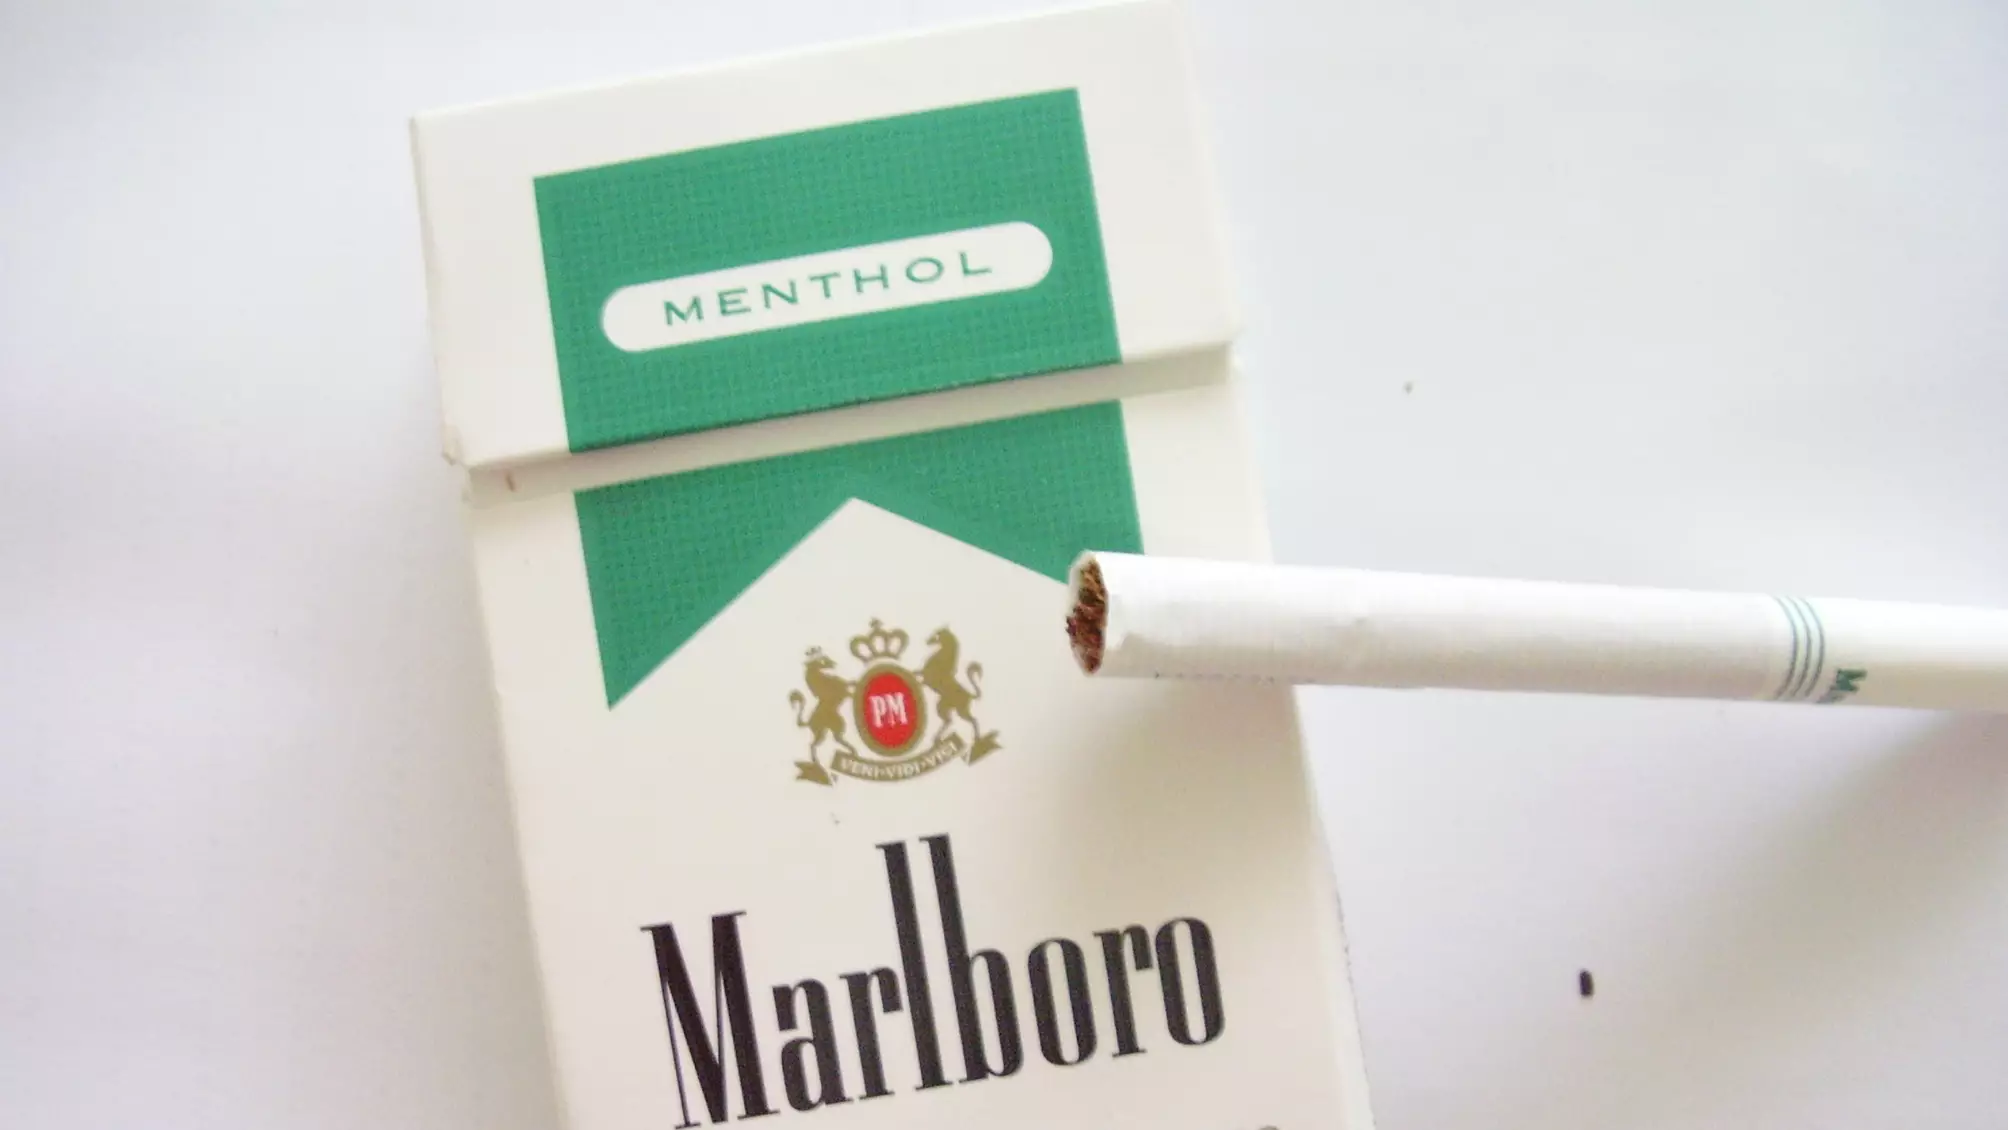 Tobacco Companies Have Been Developing Products That 'Circumvent' This Week's Menthol Ban